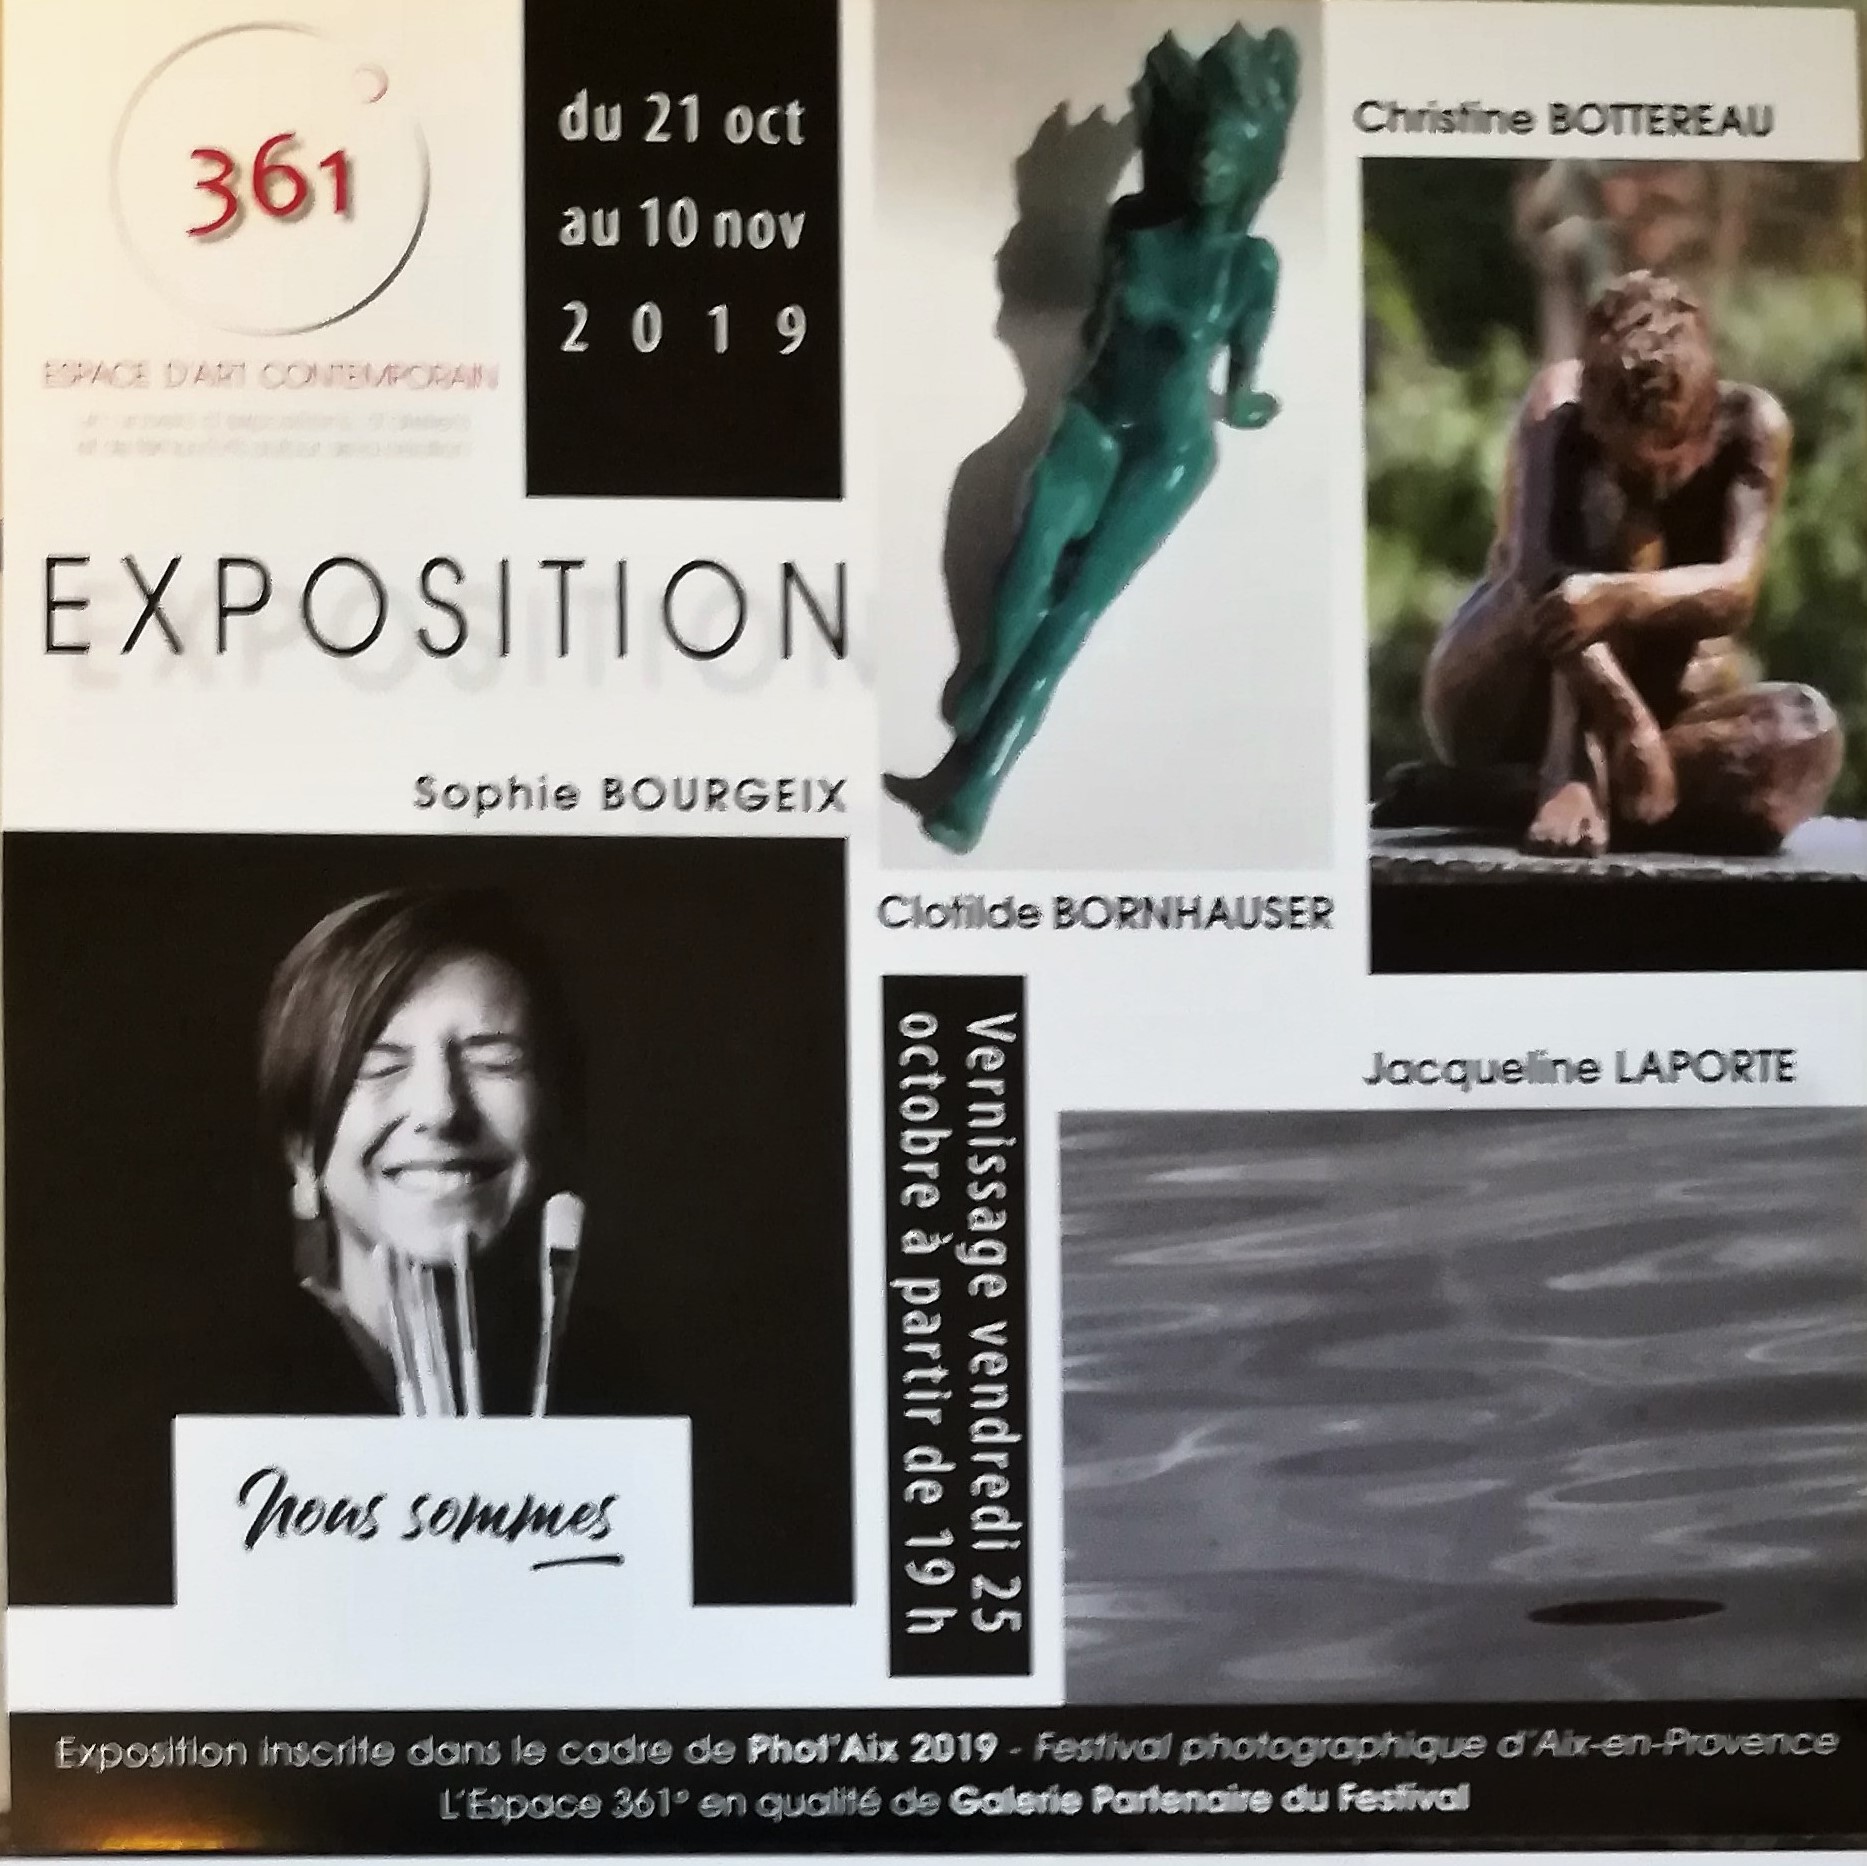 Exposition "Nous sommes"